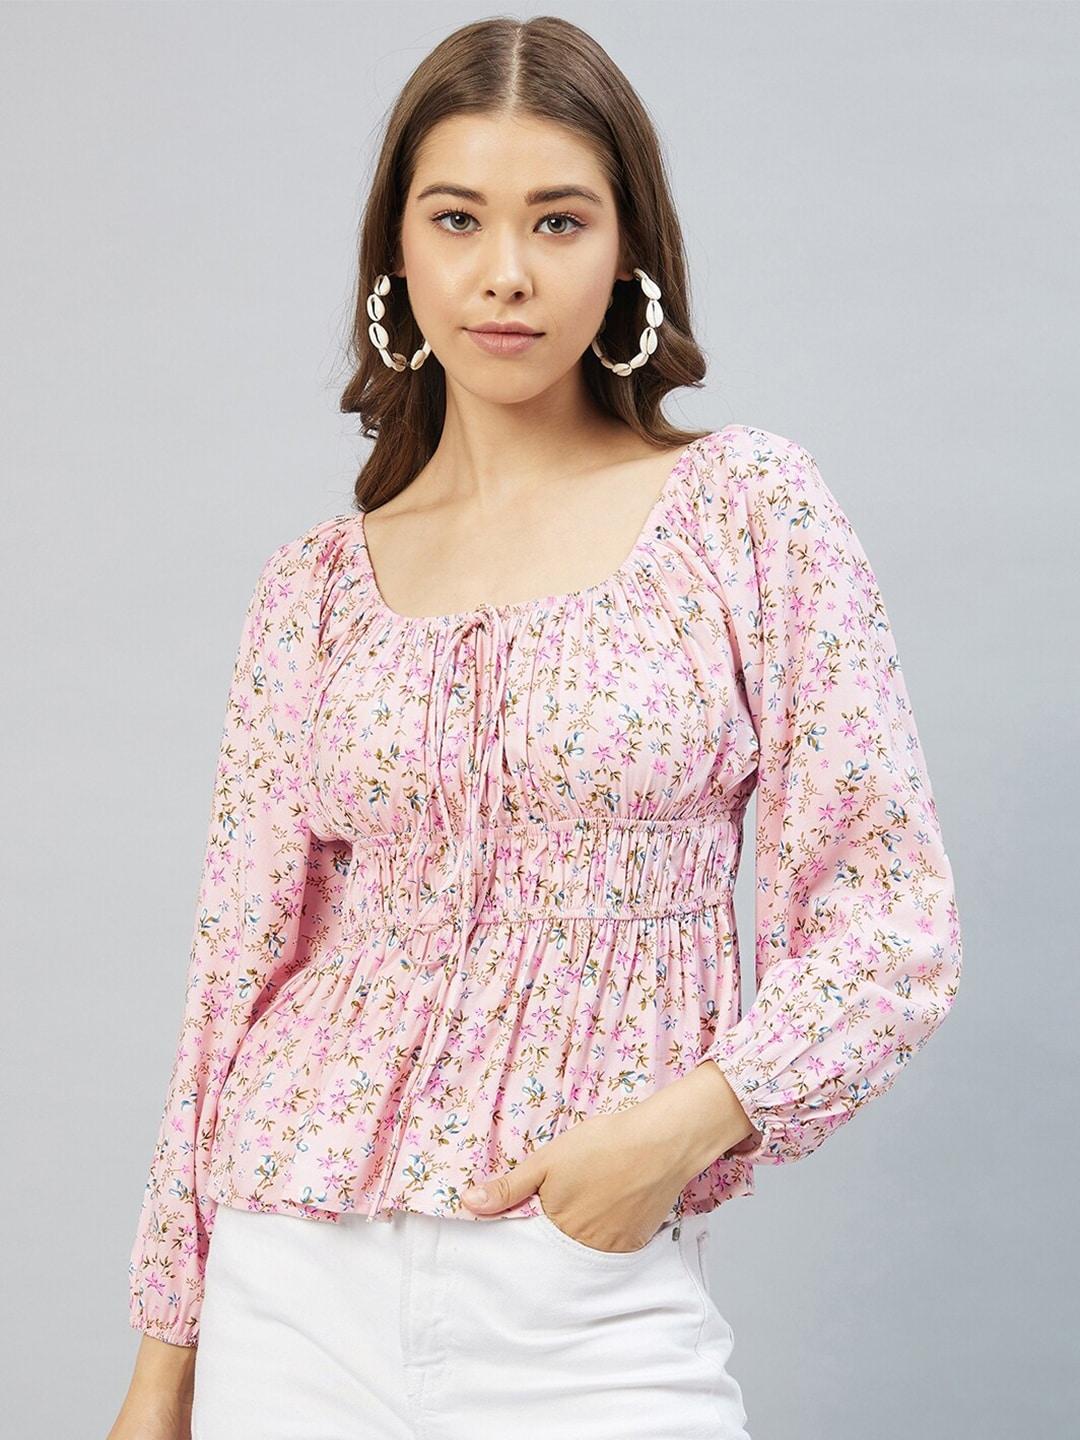 marie claire peach-coloured floral tie-up neck empire top